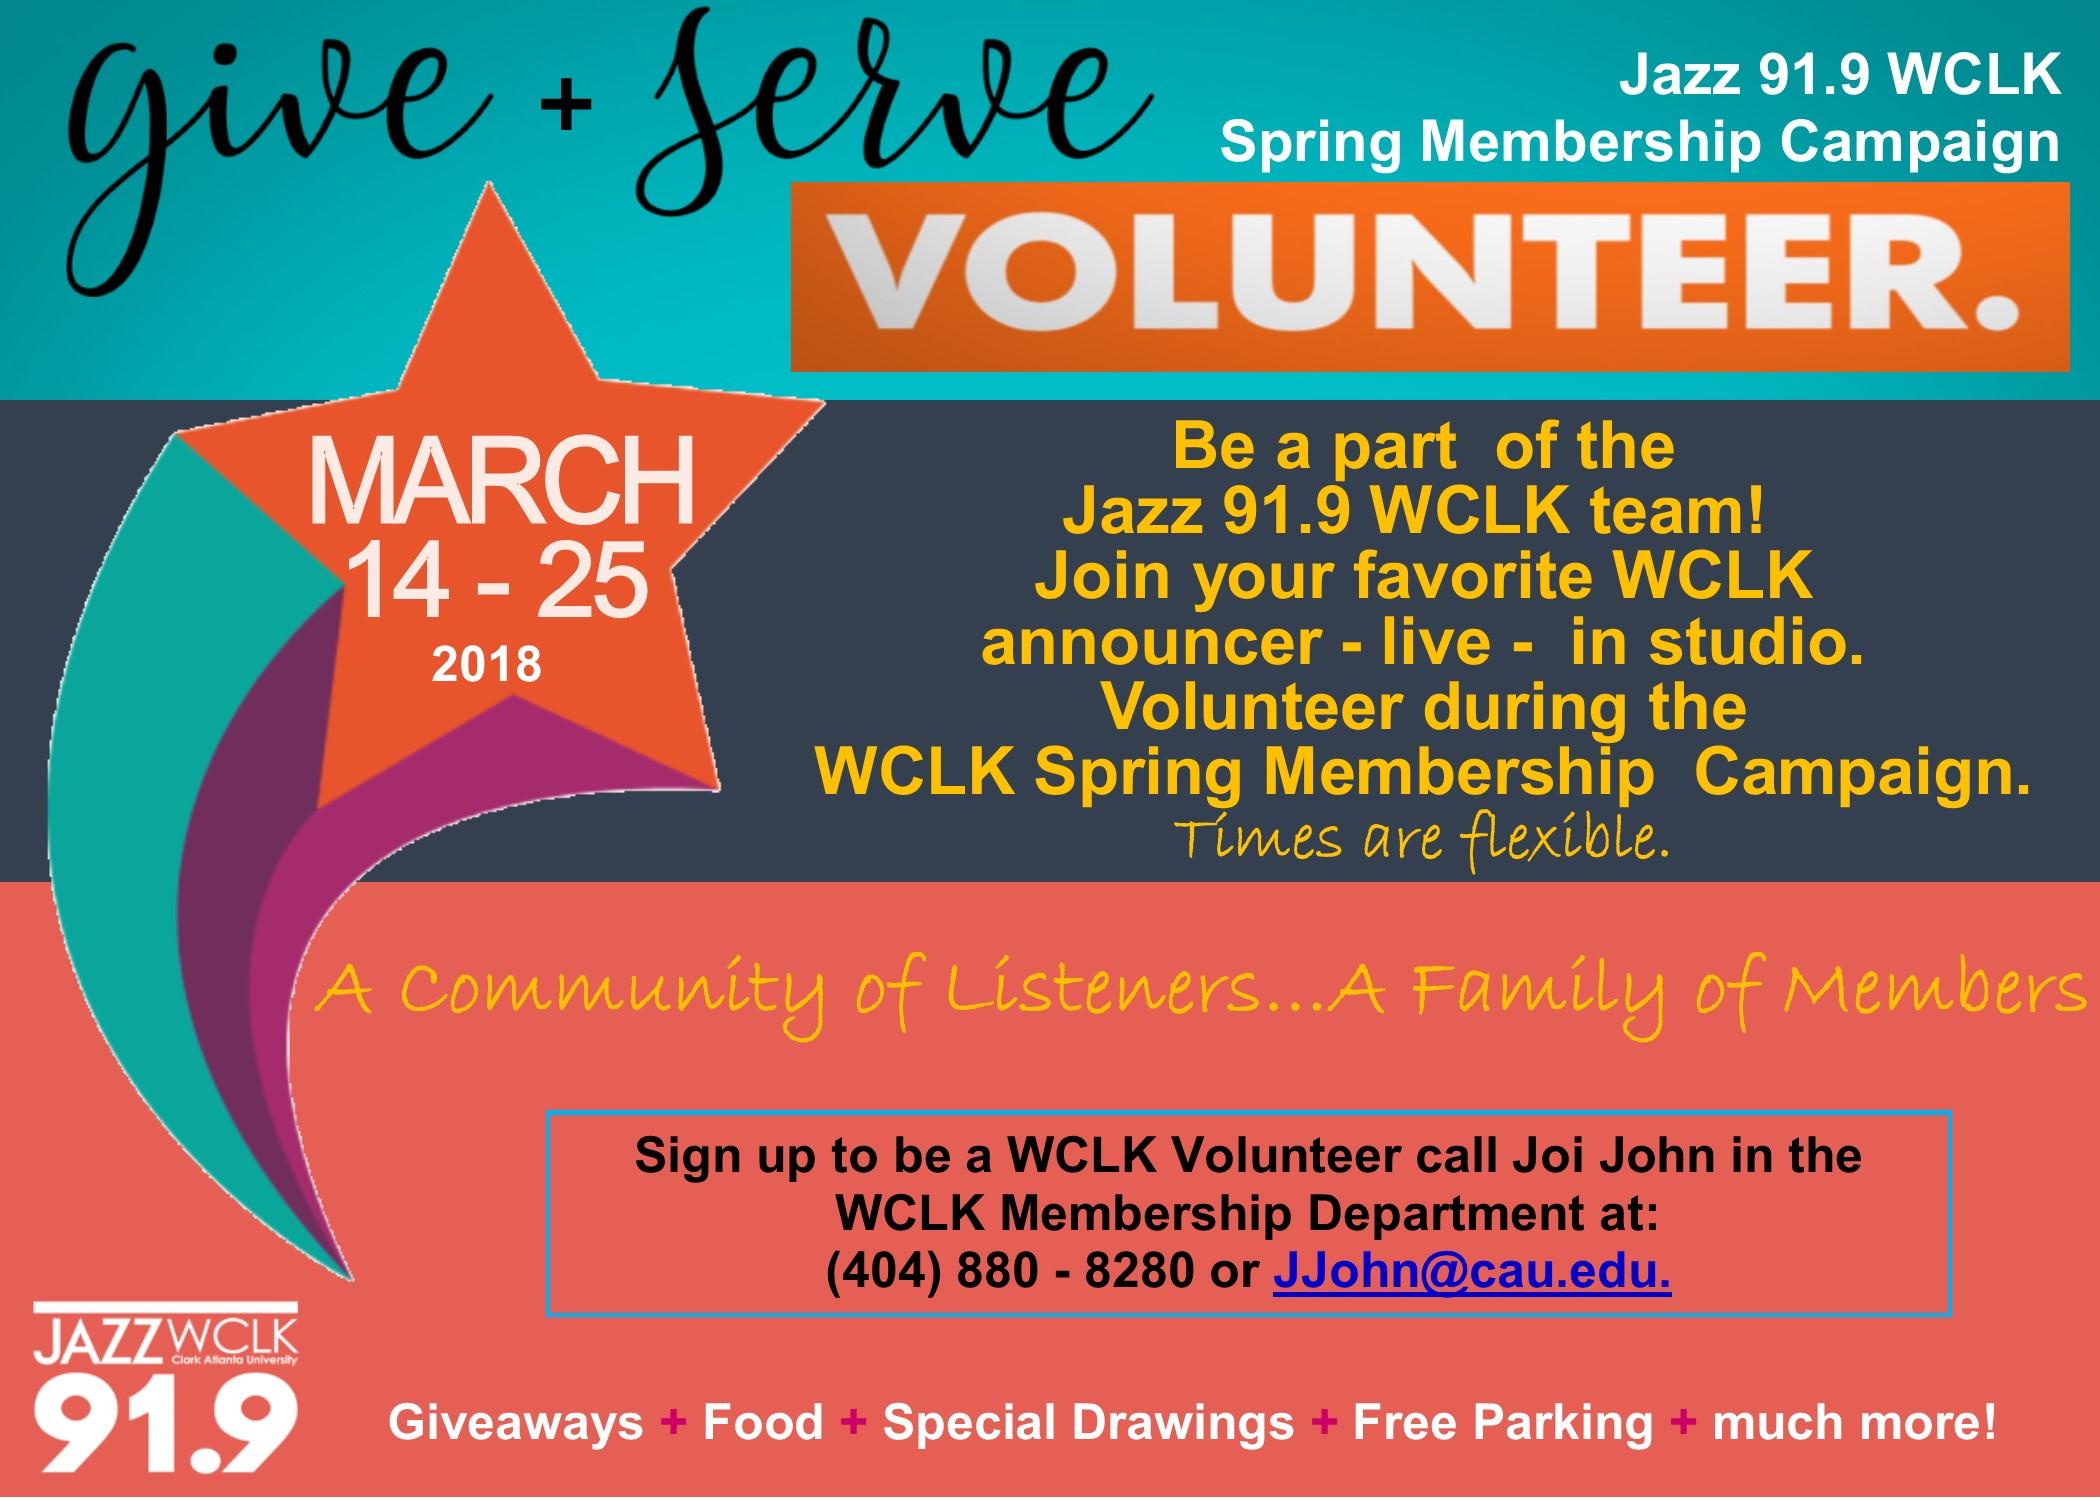 March 14 25 WCLK Needs Your Volunteer Help During Our Spring